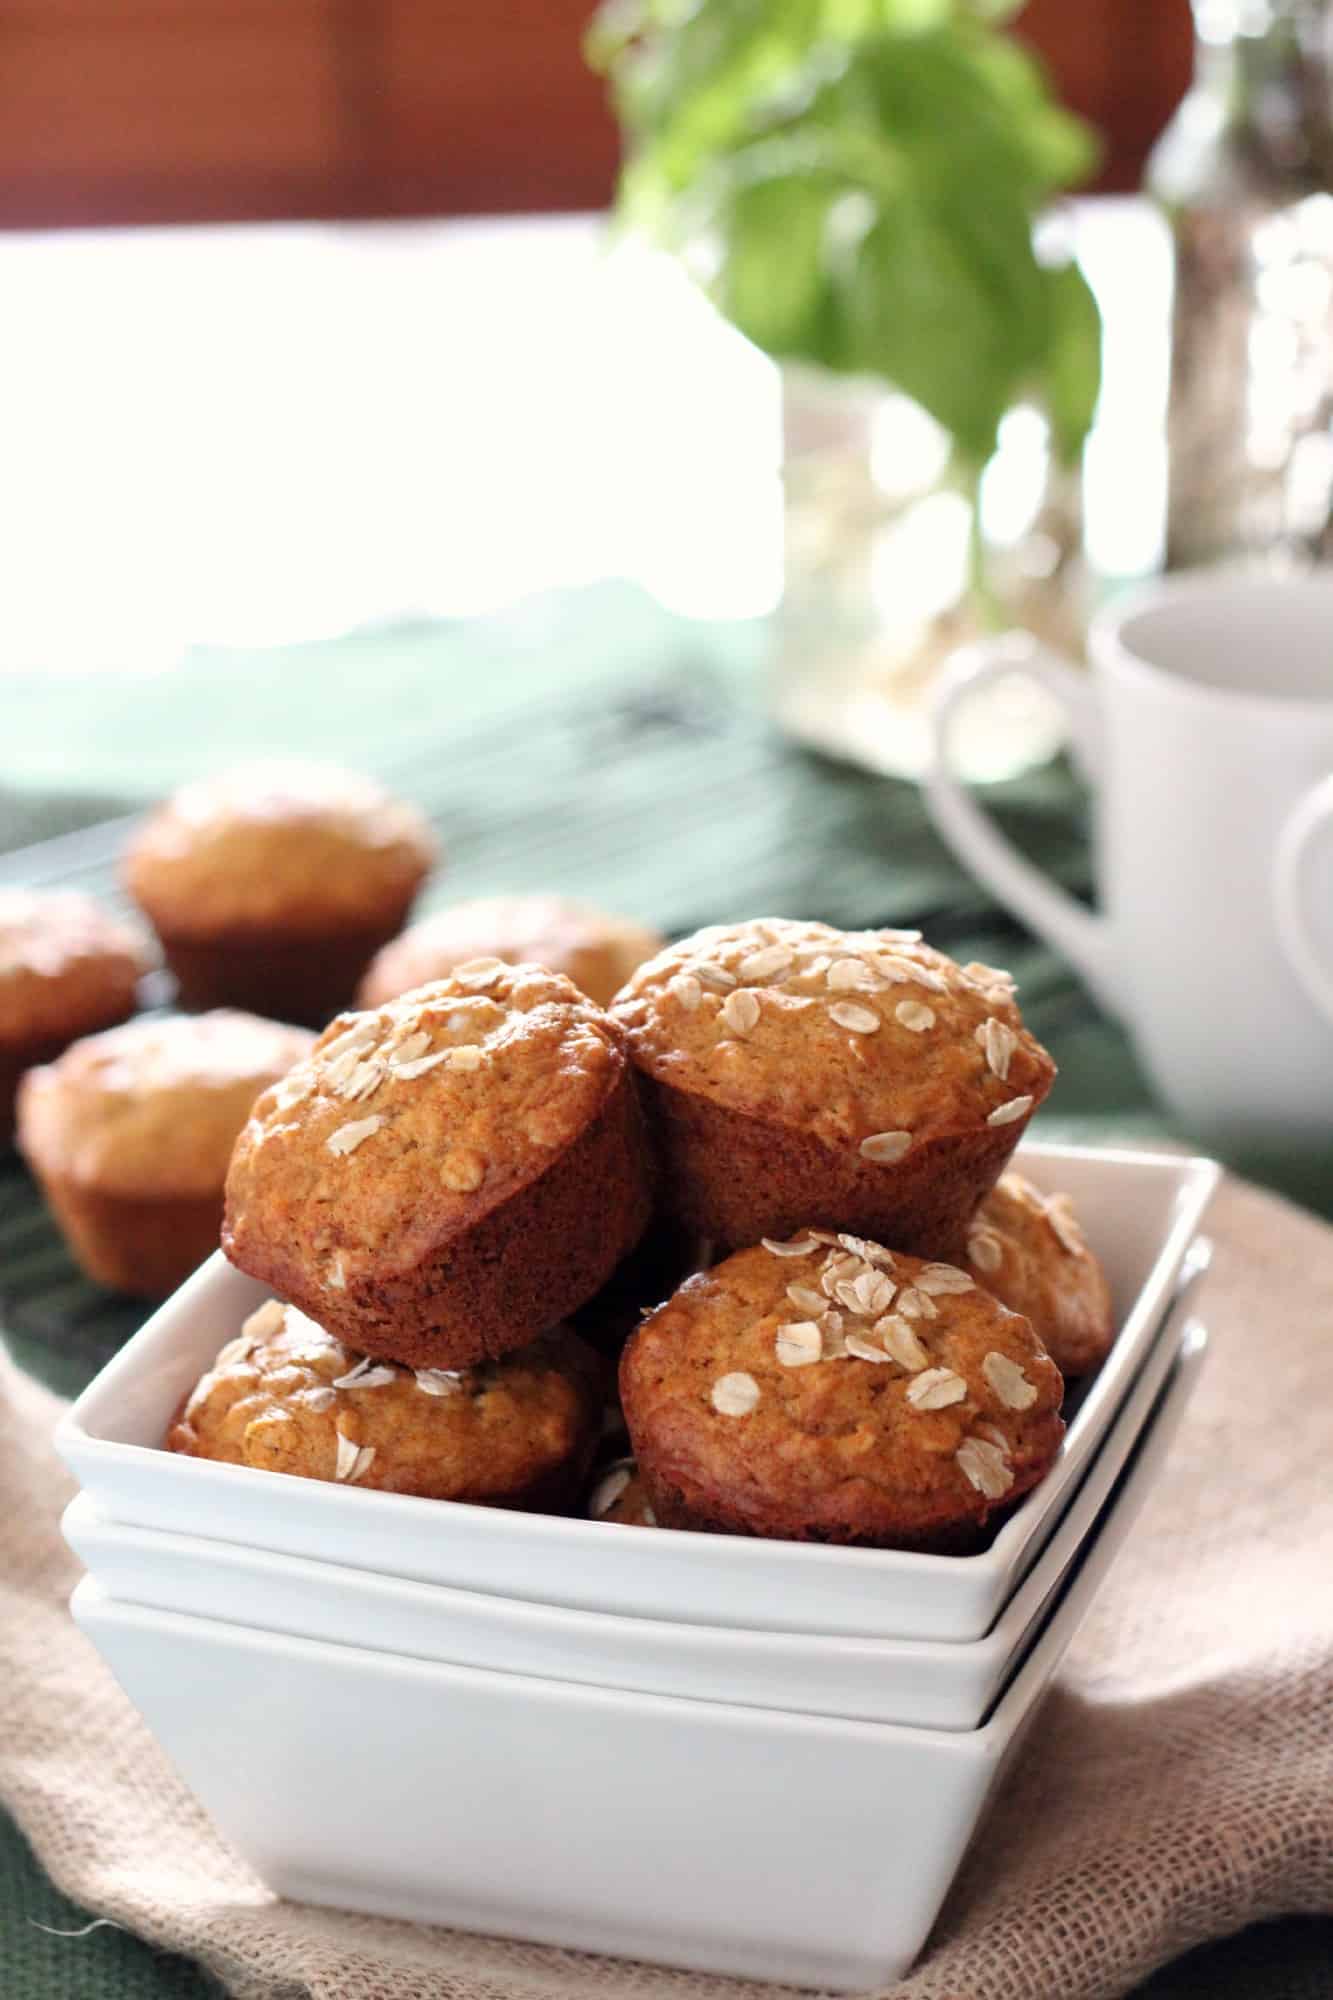 Honey-Oatmeal Muffins with #BreadBakers | A Baker's House